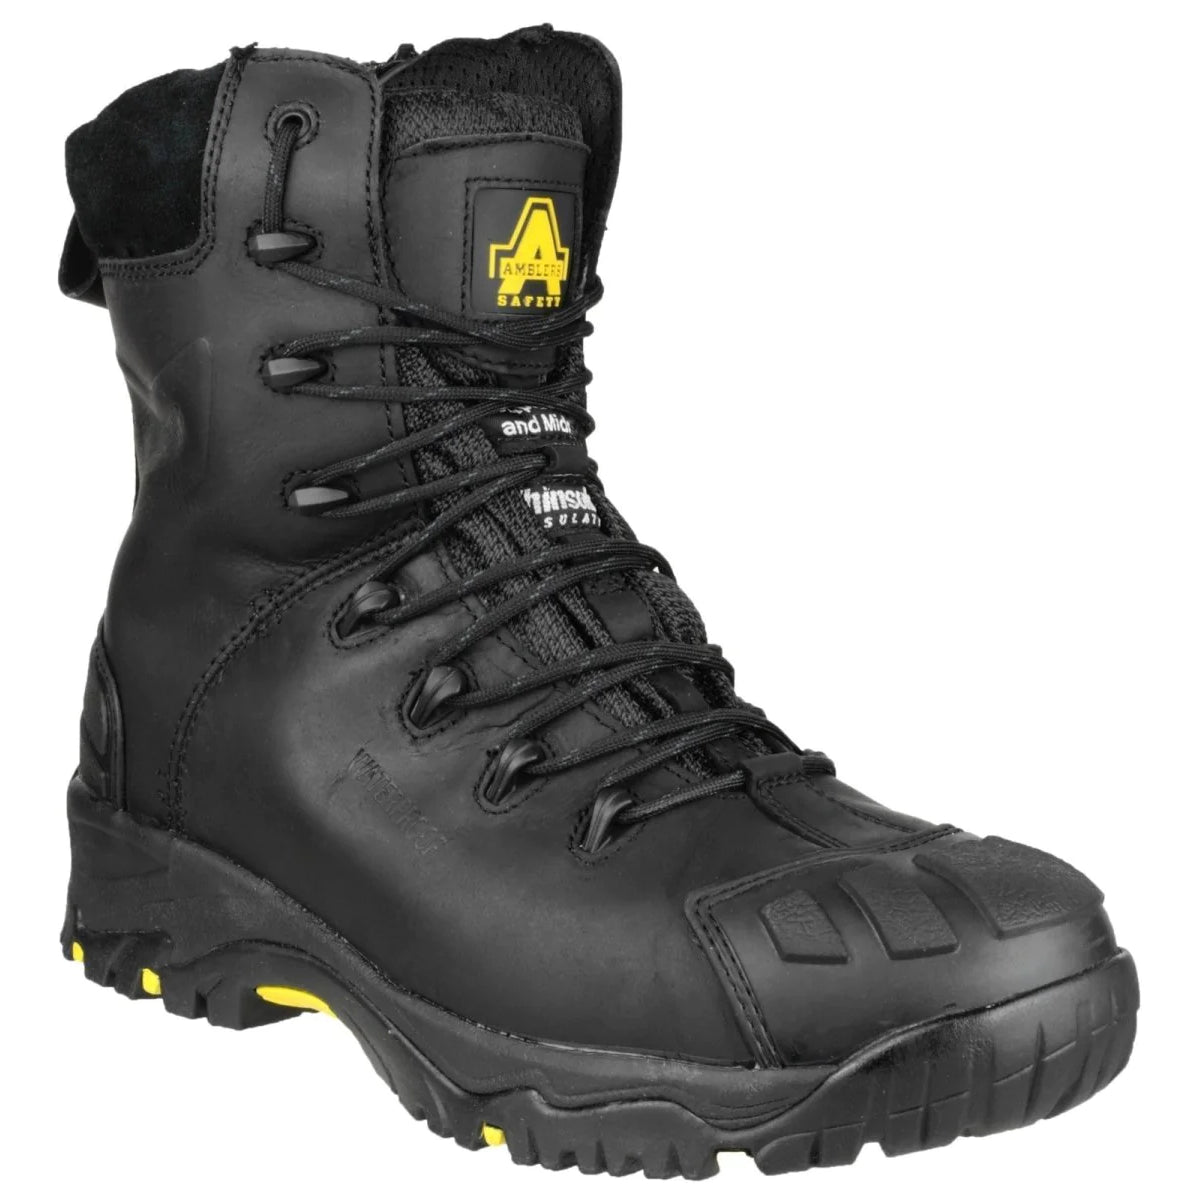 Amblers FS999 S3 Rugged Waterproof Safety Boots - Shoe Store Direct